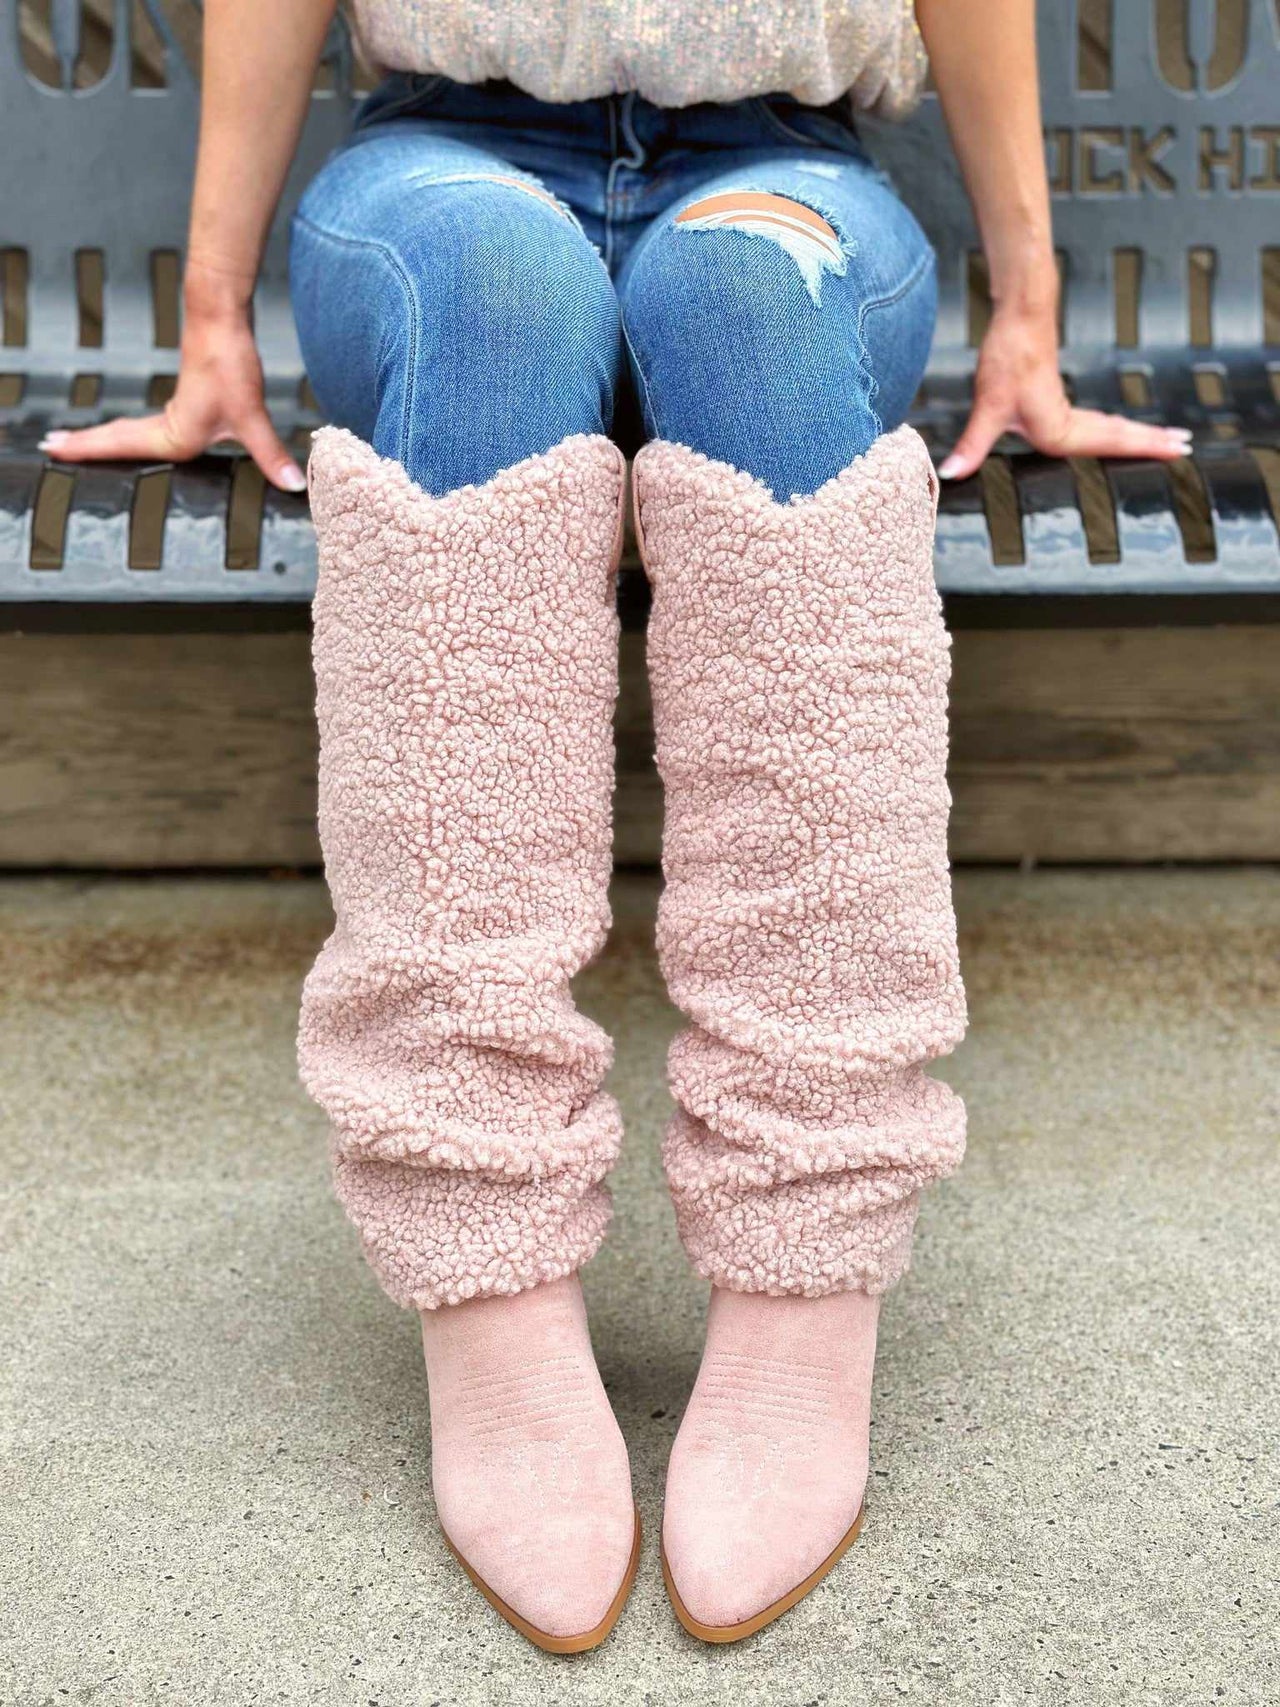 Sherpa sweater knee high boots in pink.